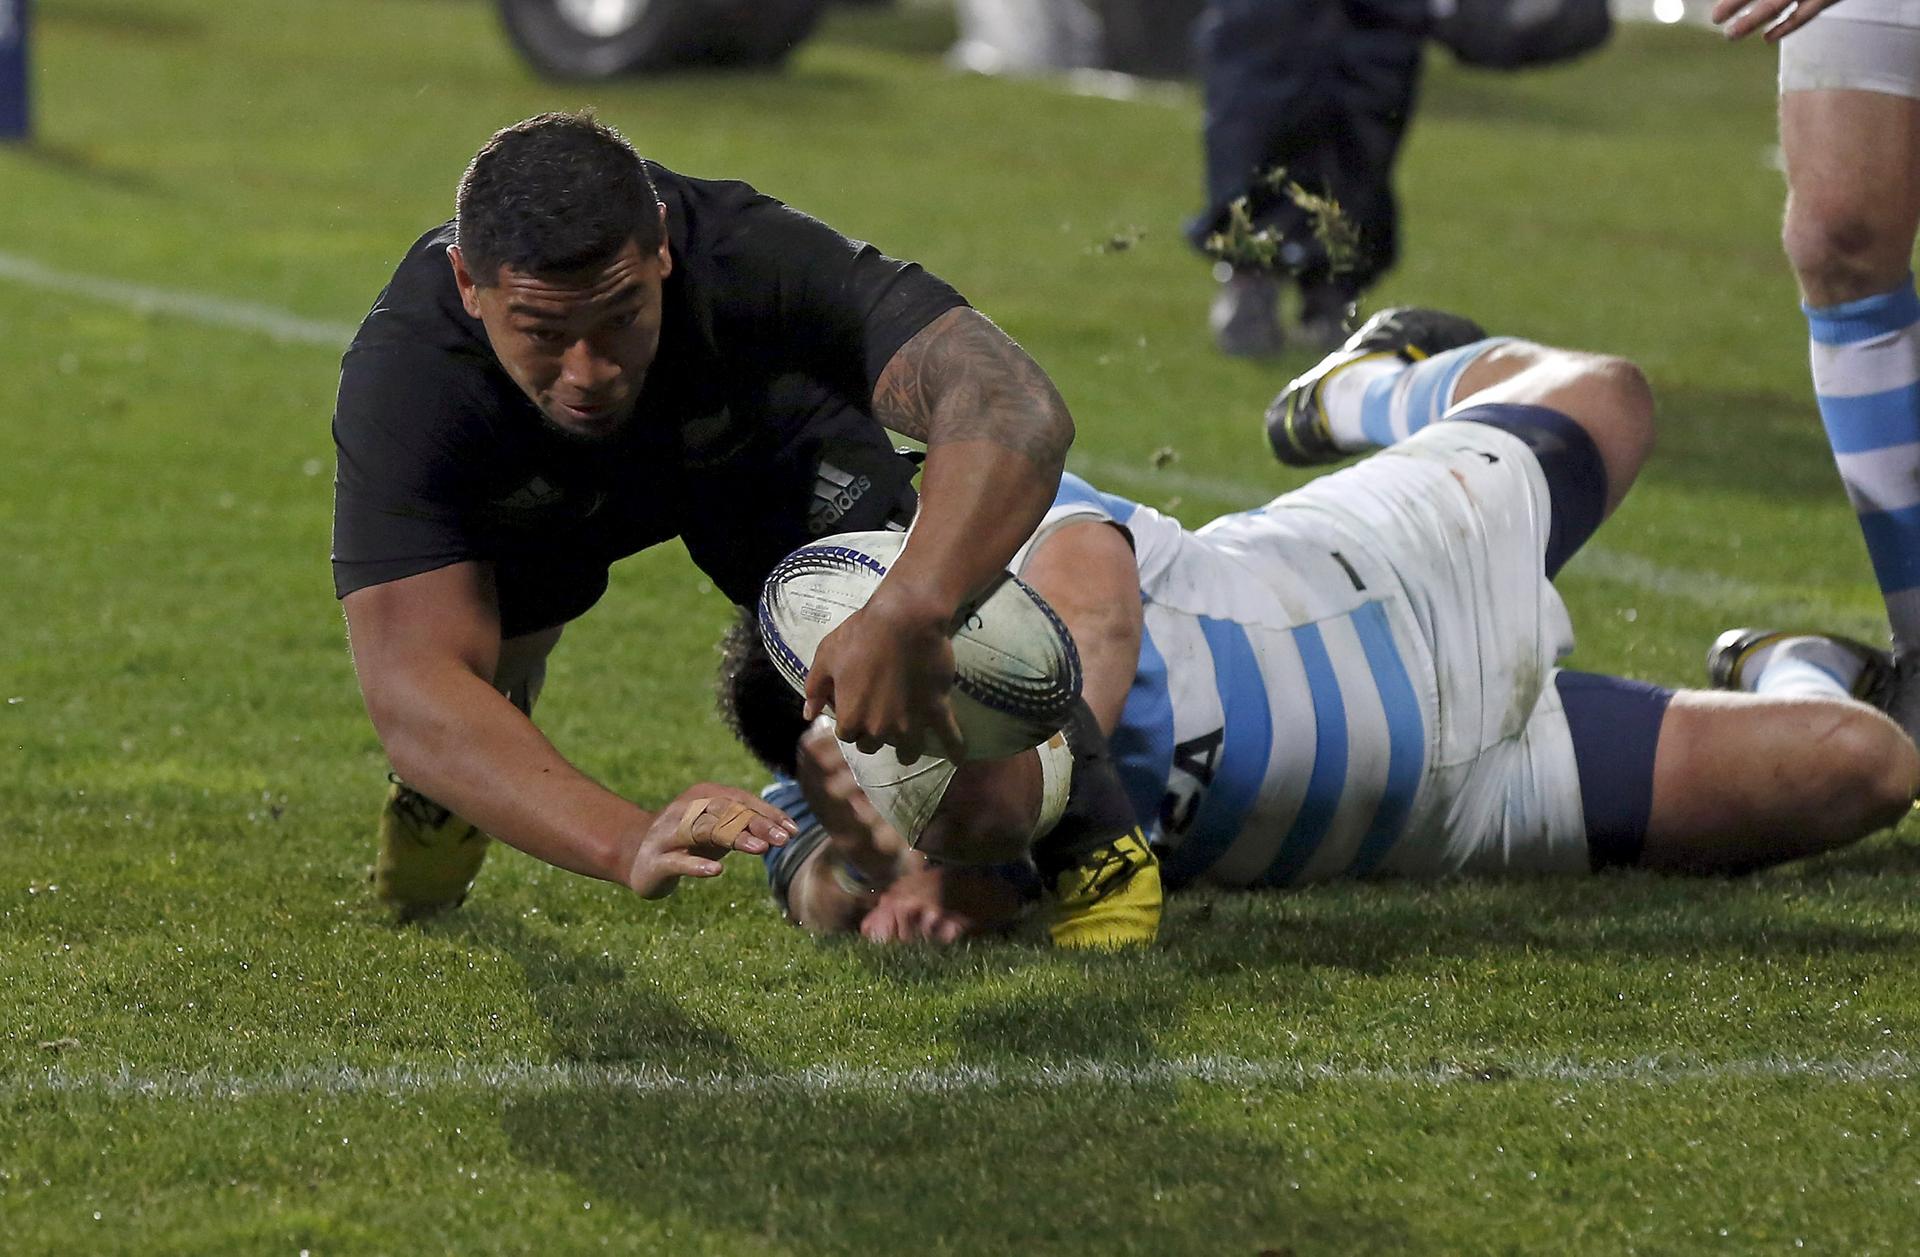 Charles Piutau scores for the All Blacks in their 39-18 win over Argentina in the 2015 Rugby Championship opener in Christchurch. Photo: Reuters